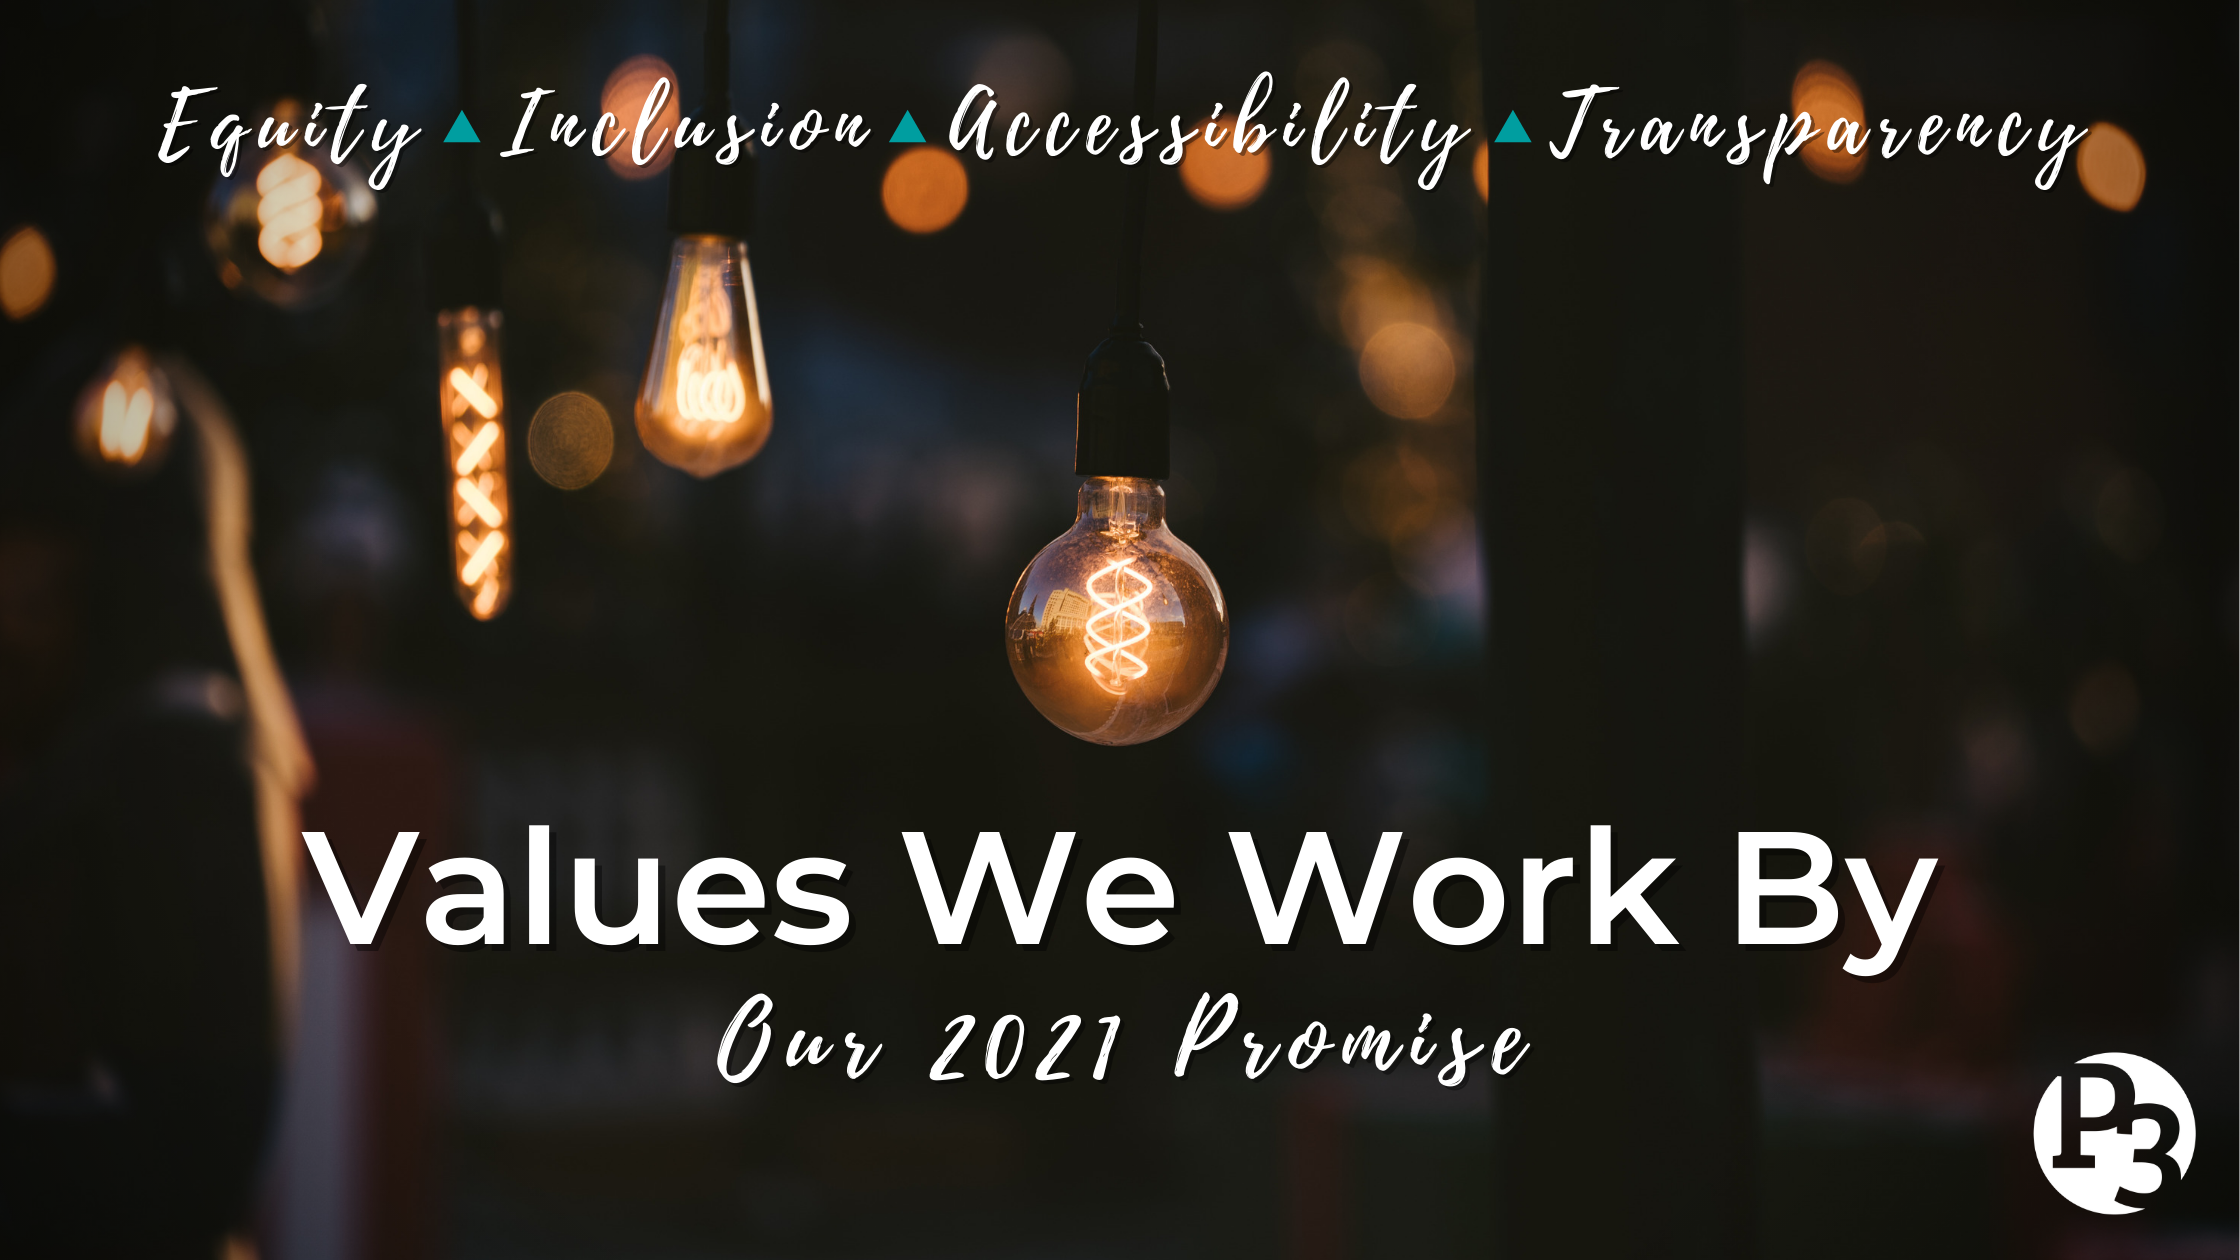 Values We Work By: Our 2021 Promise